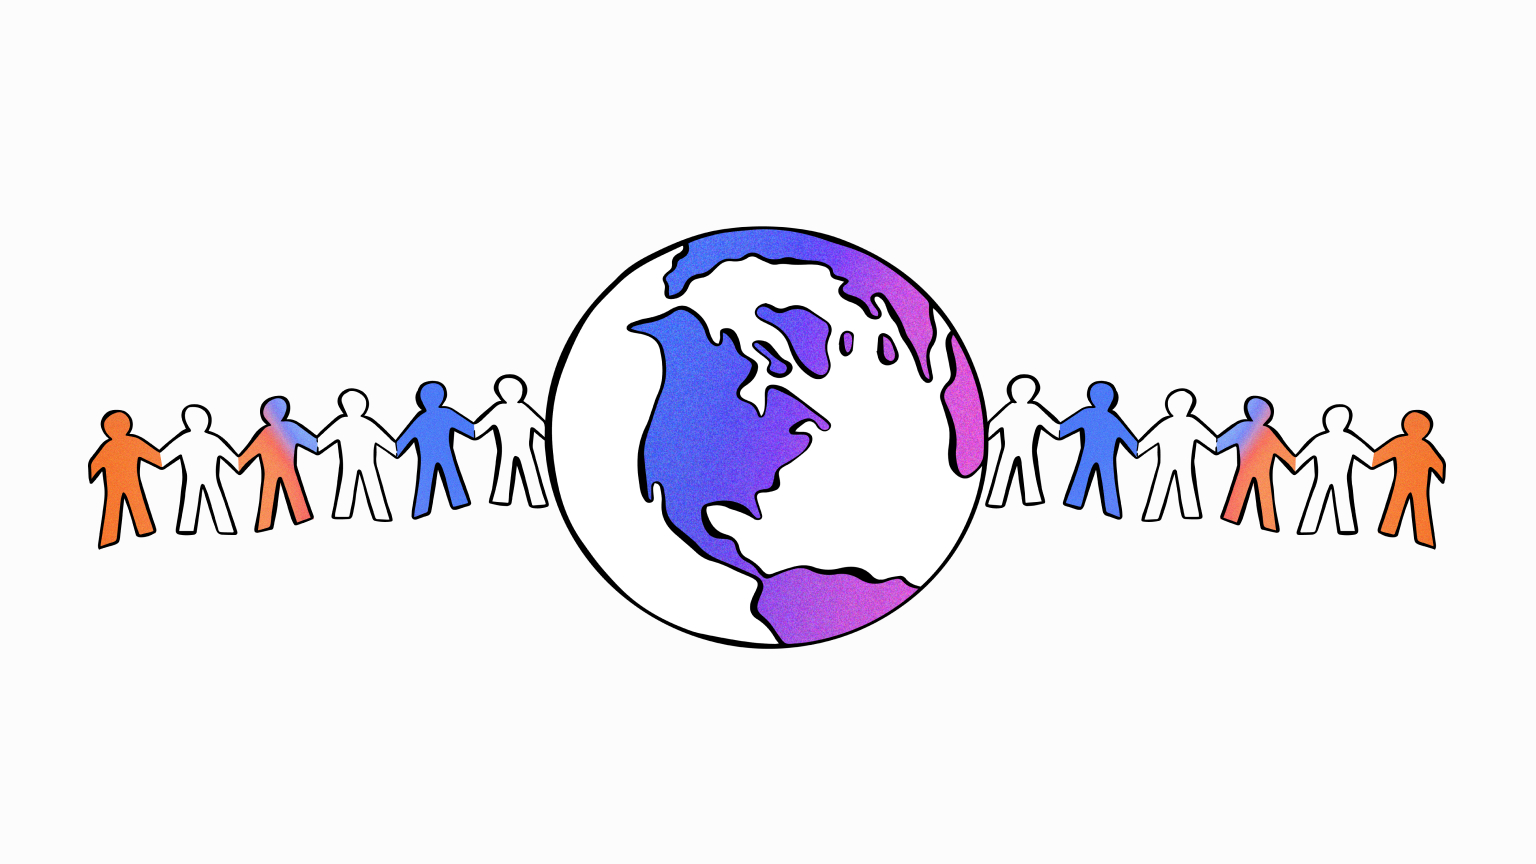 Employee resource group illustration on how to promote diversity and inclusion in the workplace around the world